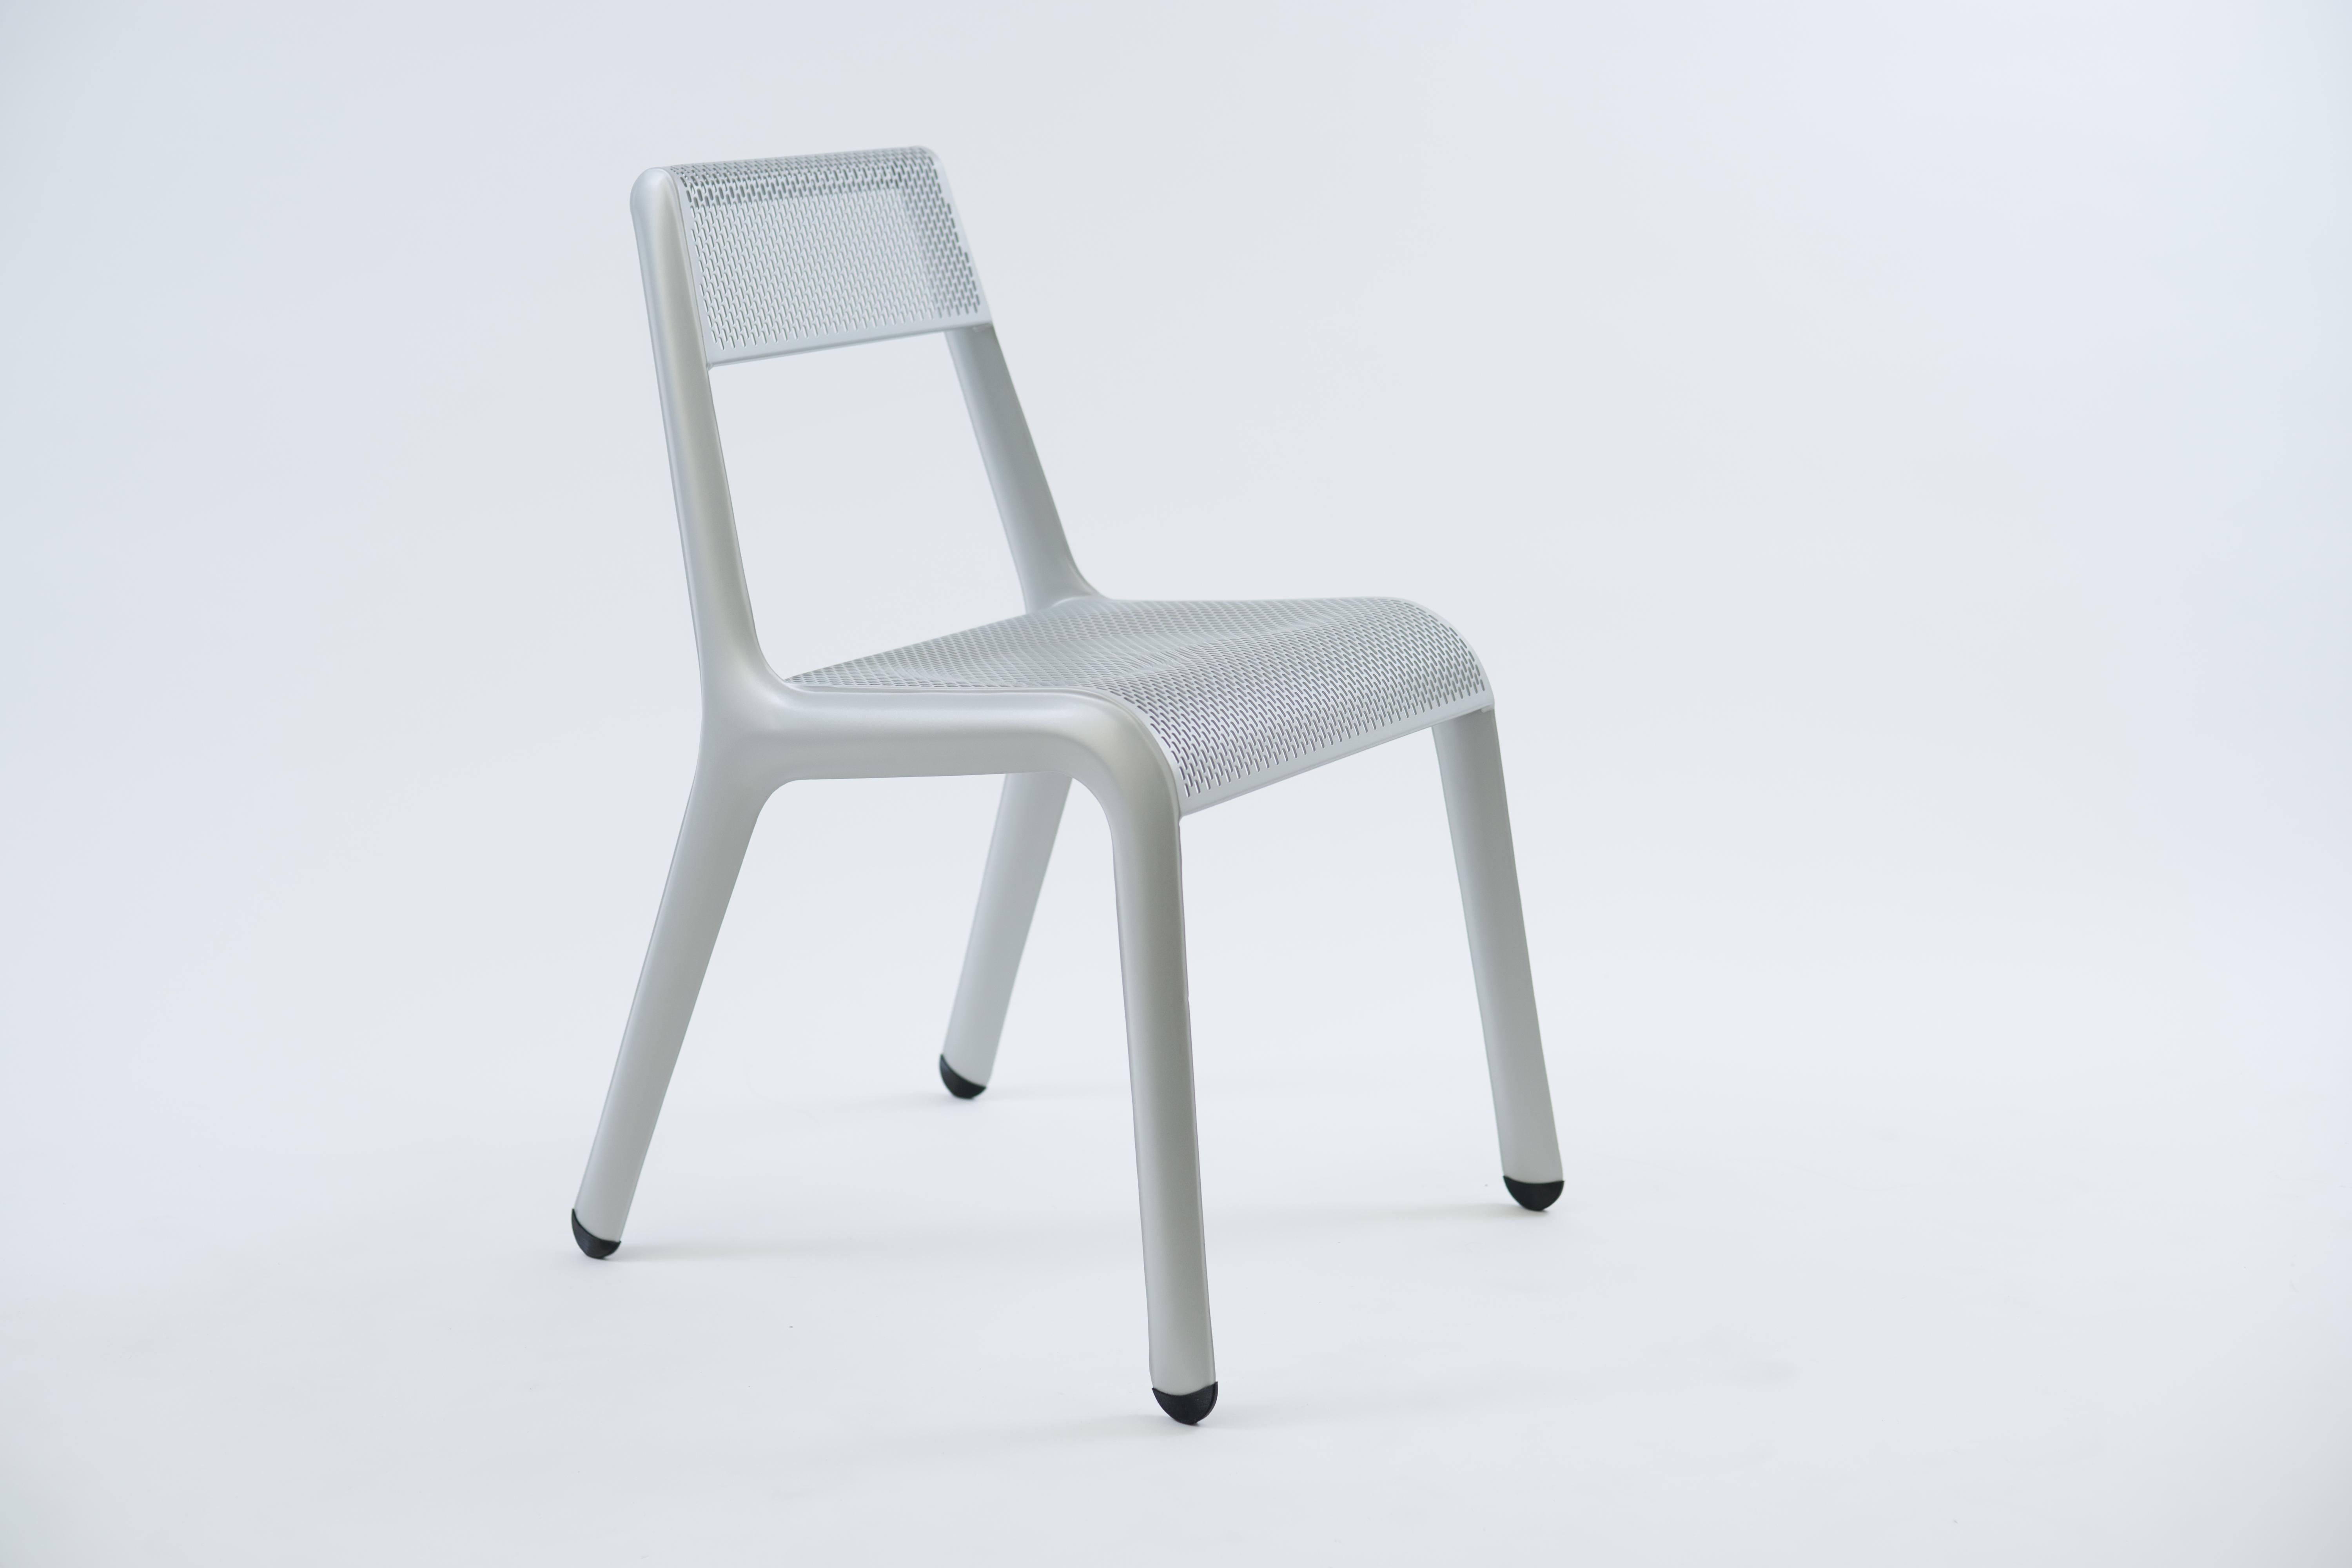 Natural Anodic Leggera chair by Zieta
Dimensions: D 58 x W 49 x H 78 cm 
Material: Carbon Steel. 
Finish: Powder-Coated.
Available in other colors. Also available in Ultraleggera version. 


LEGGERA chair is a steel seating with clean lines and